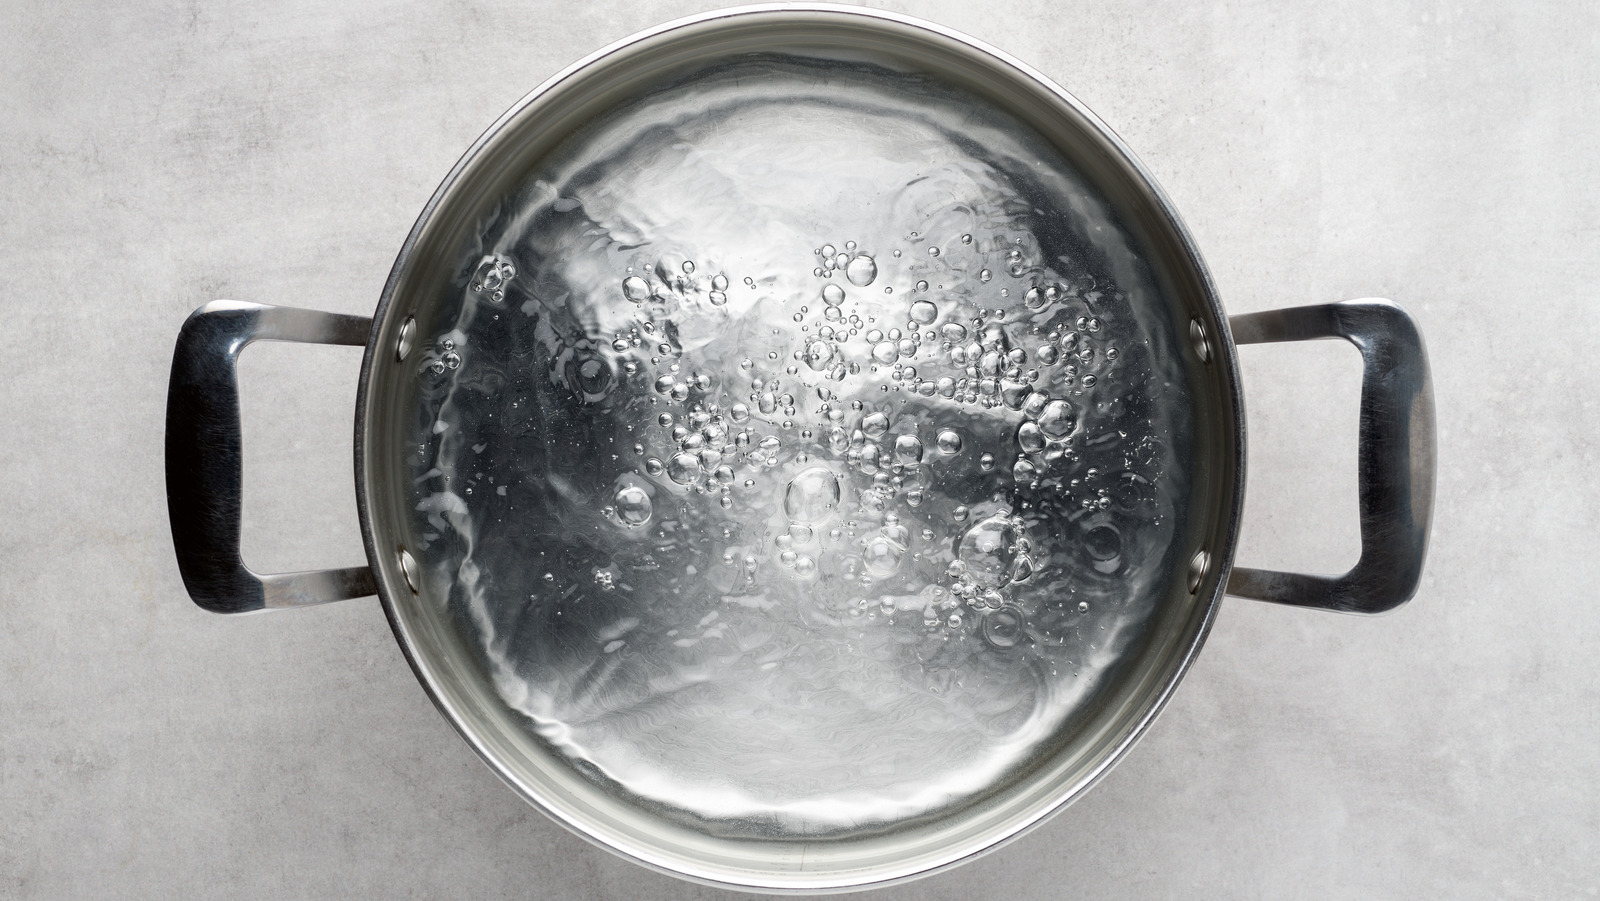 Boiling Pot Of Water On Hot Electric Burner Stock Photo, Picture